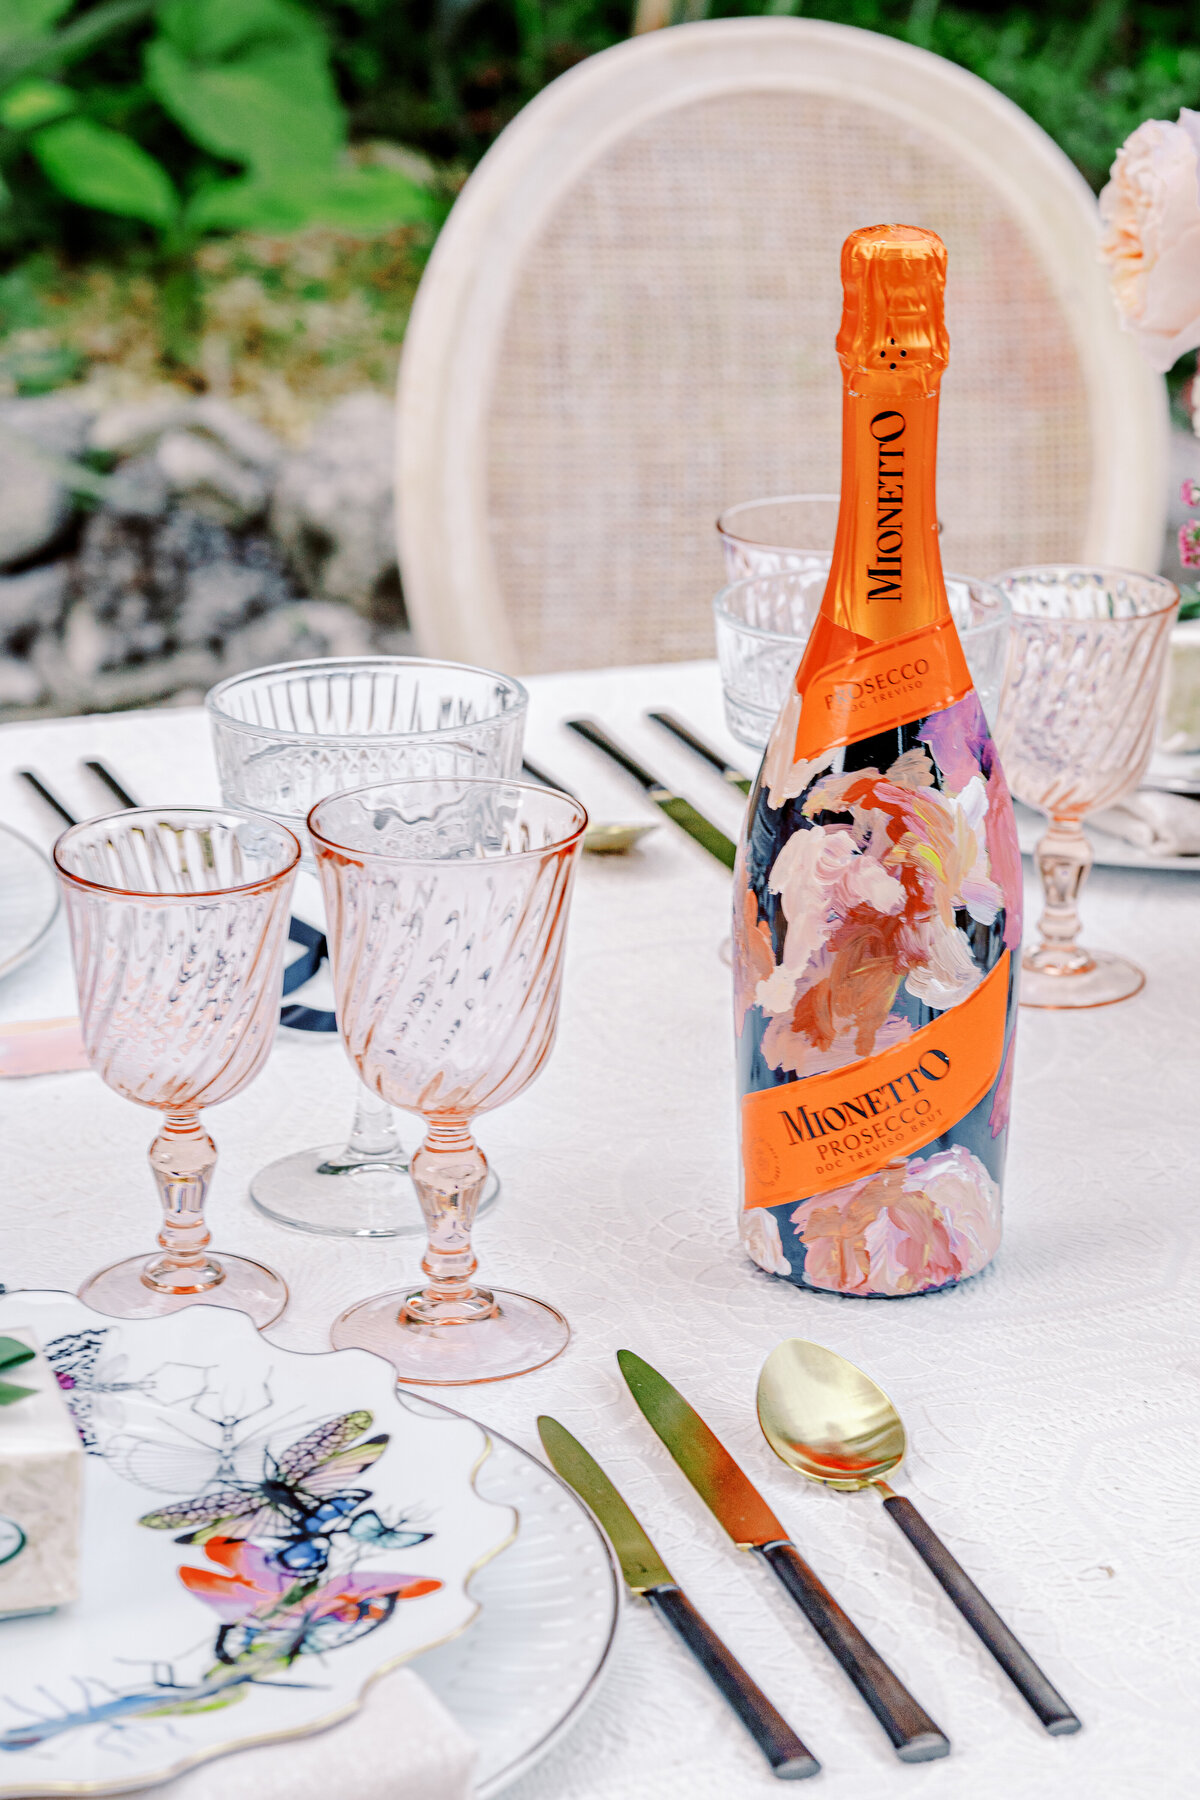 Lake Como Italy wedding reception table of colorful butterfly plates and handpainted Prosecco bottles photographed by Lake Como Wedding photographer